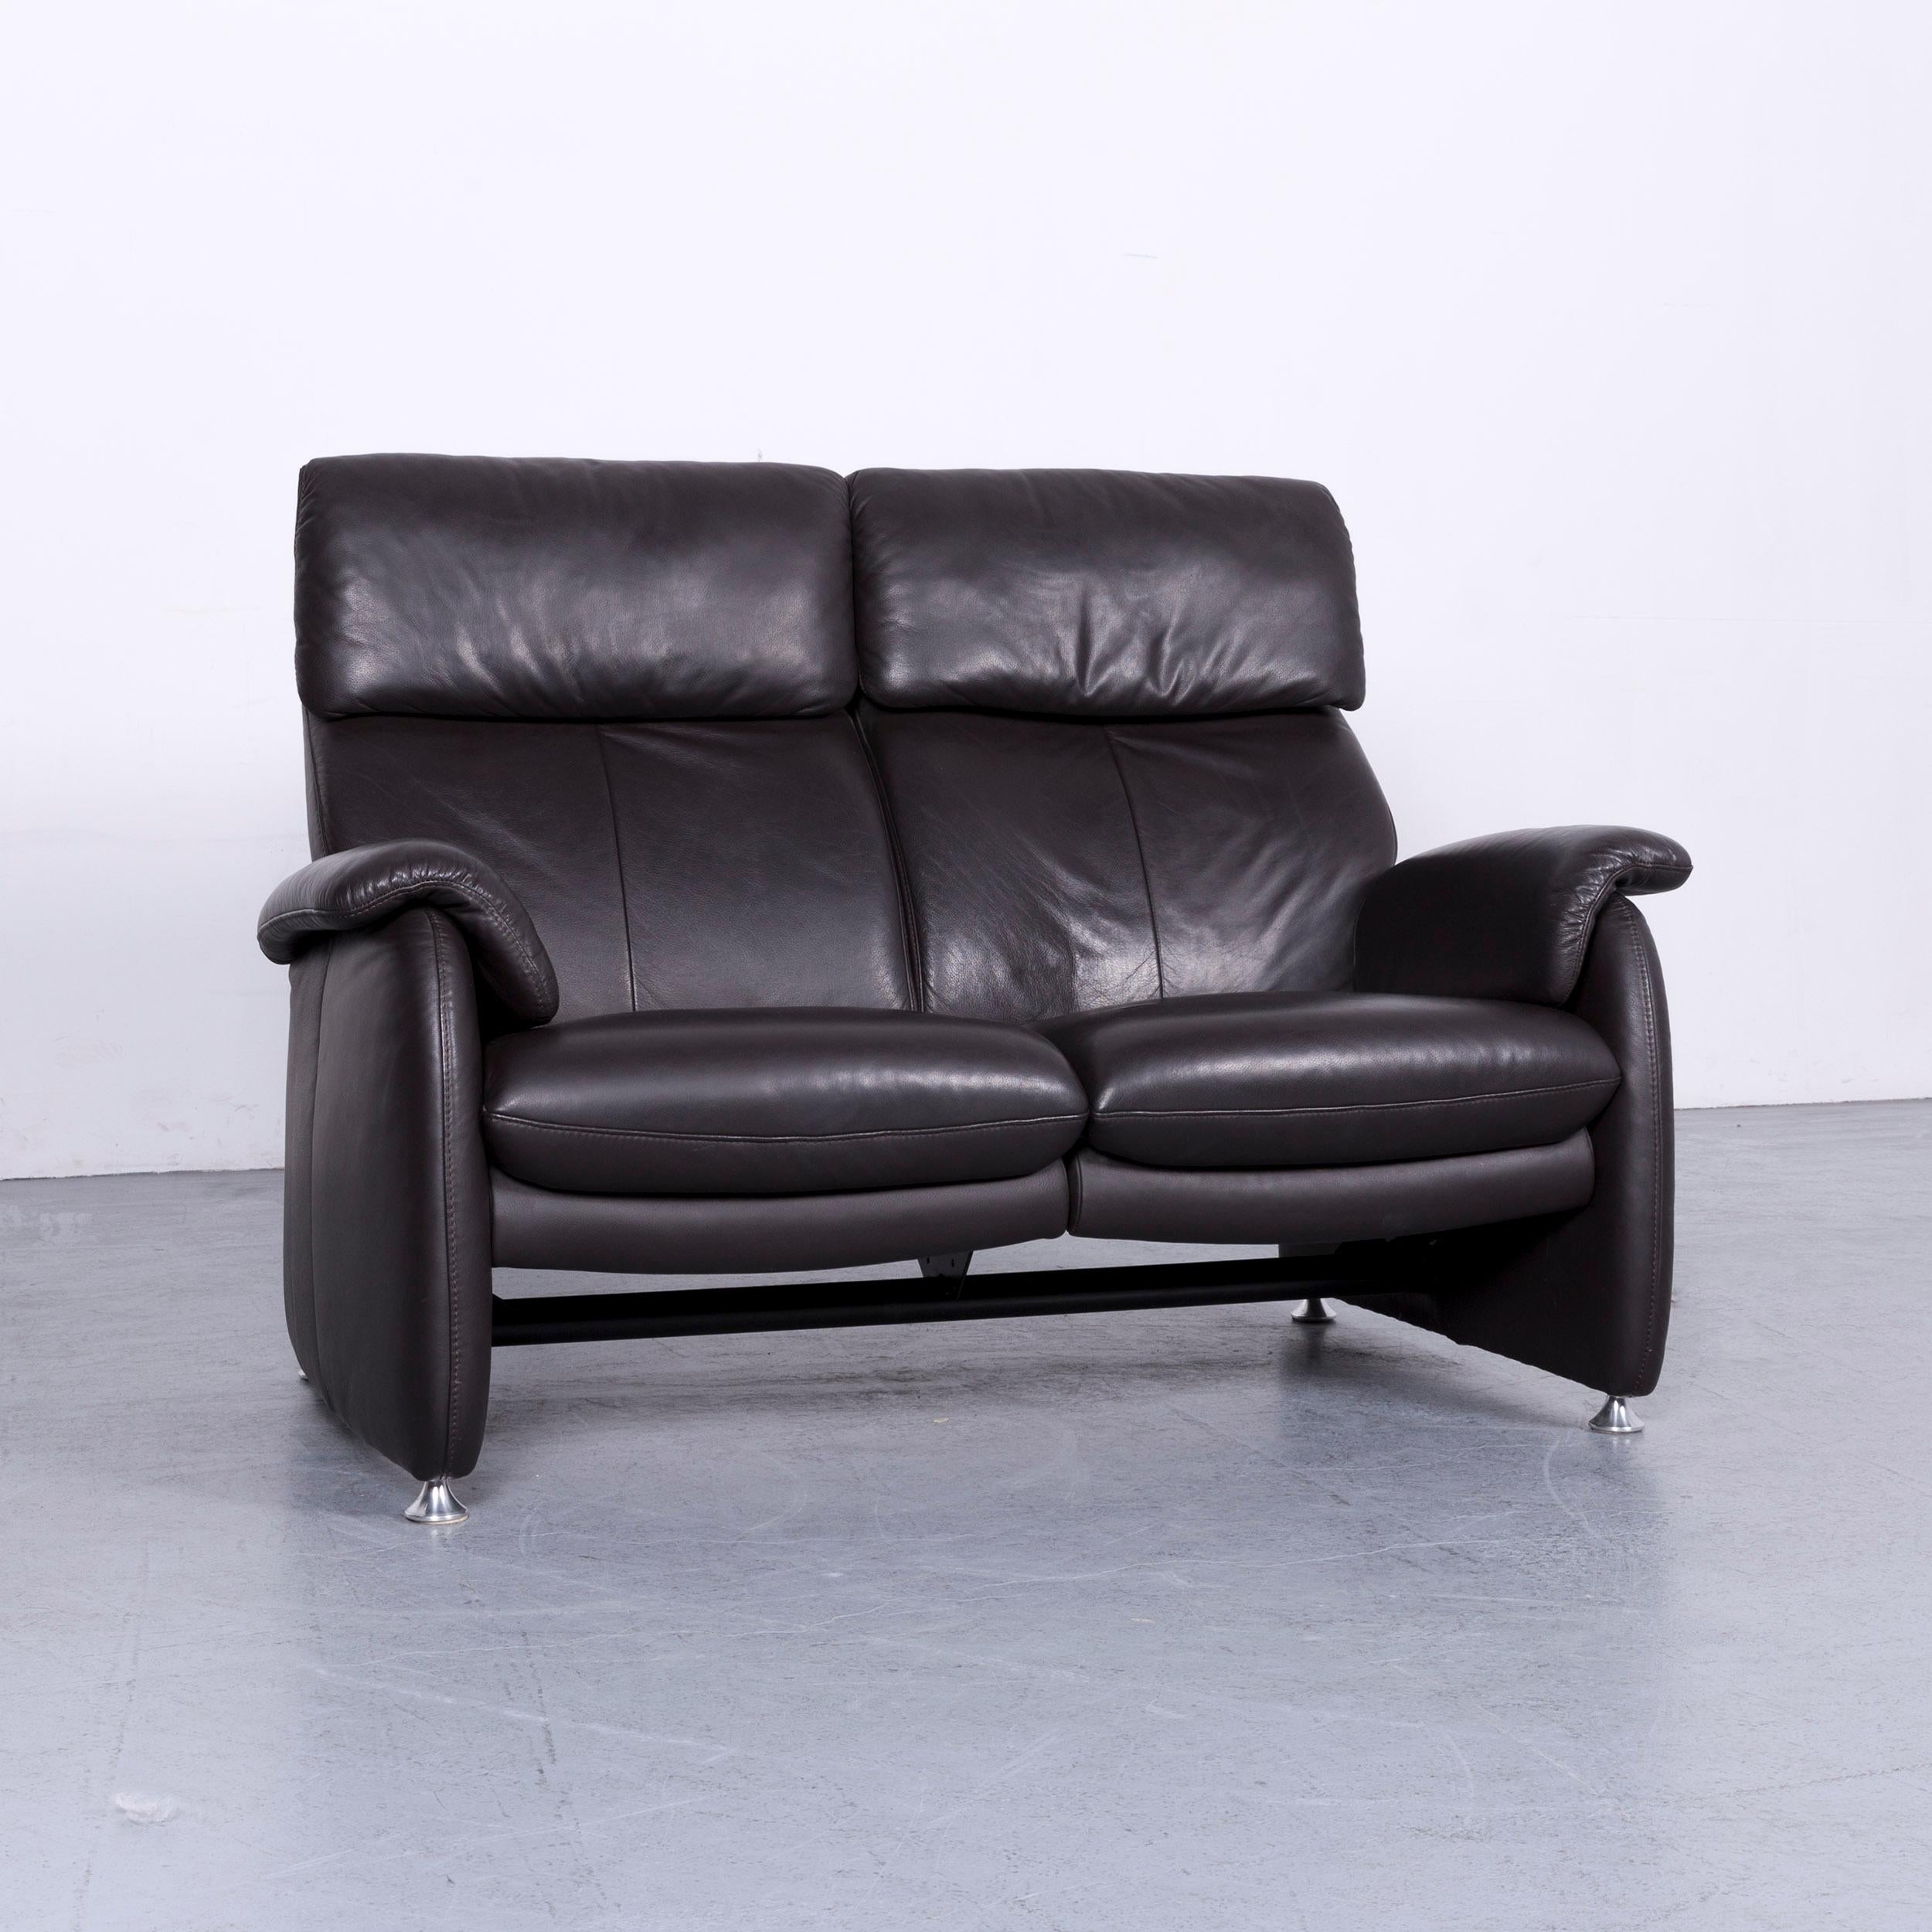 We bring to you a Willi Schillig designer leather sofa brown two-seat couch recliner.































